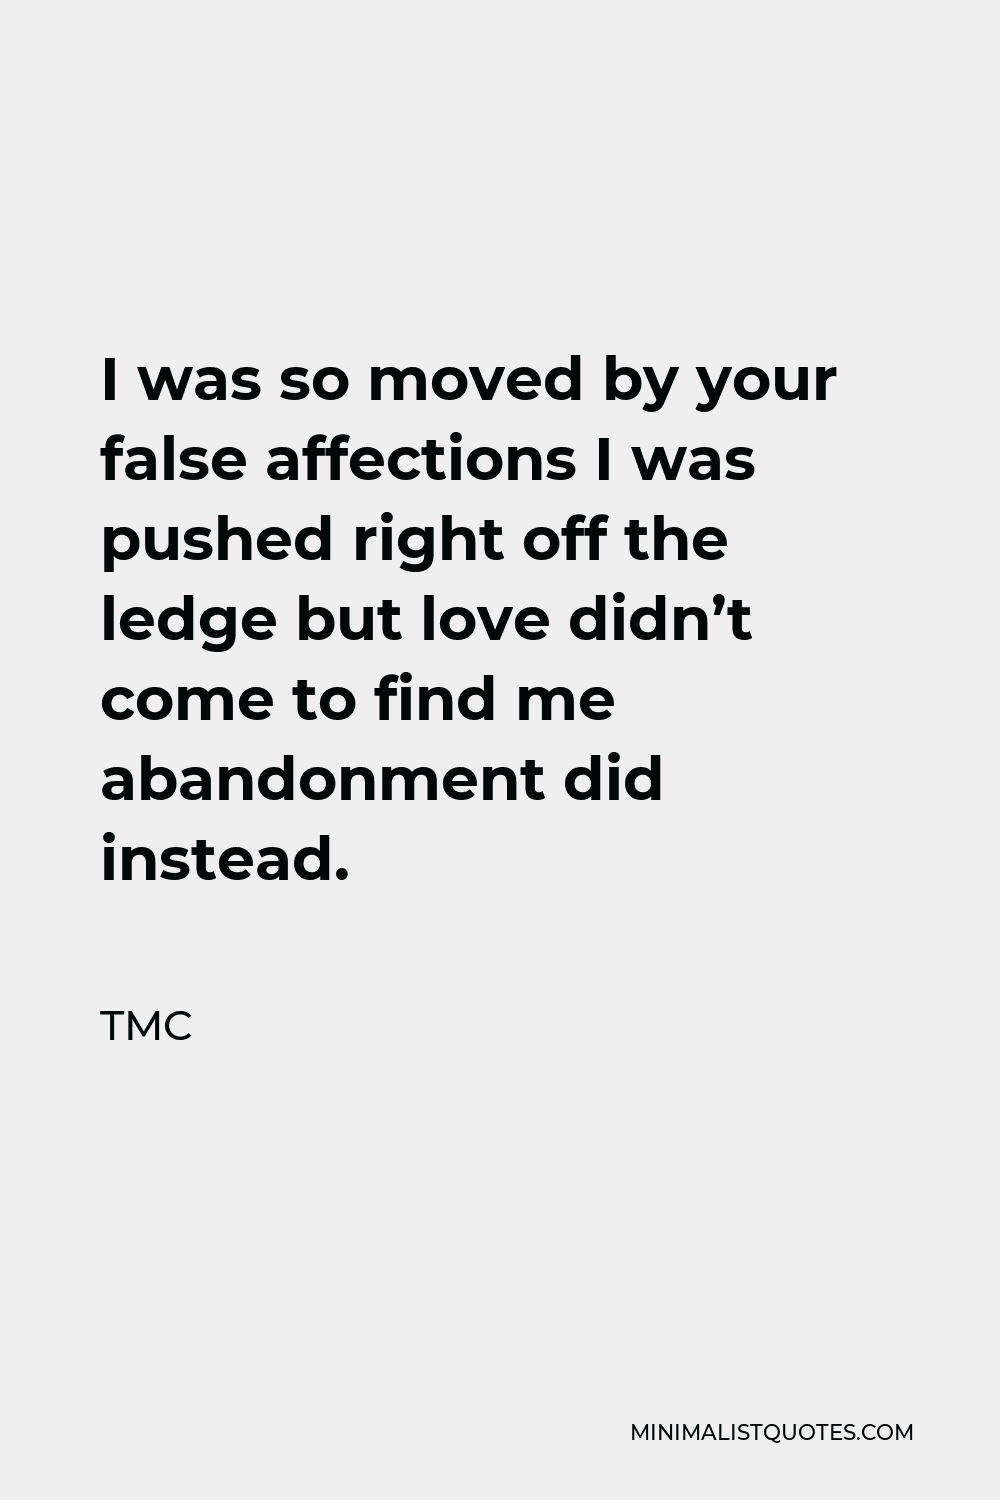 TMC Quote - I was so moved by your false affections I was pushed right off the ledge but love didn’t come to find me abandonment did instead.